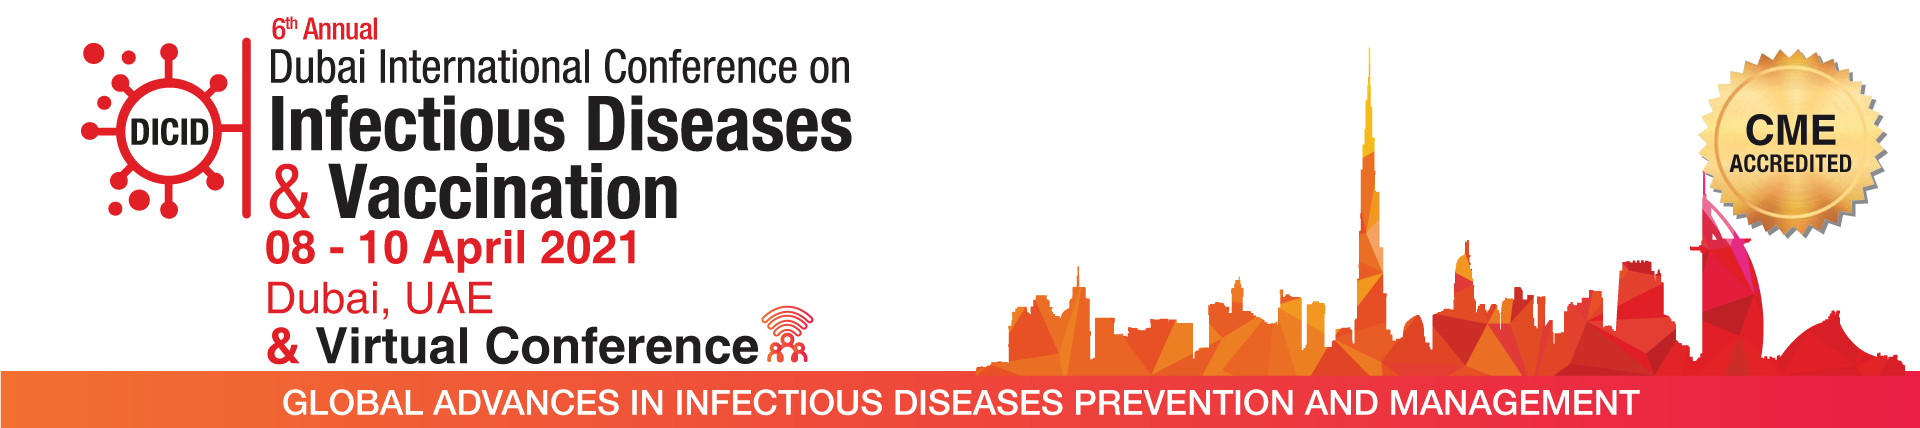 6th Annual Dubai International Conference on Infectious Diseases & Vaccination - 08 April 2021, Online, United Arab Emirates